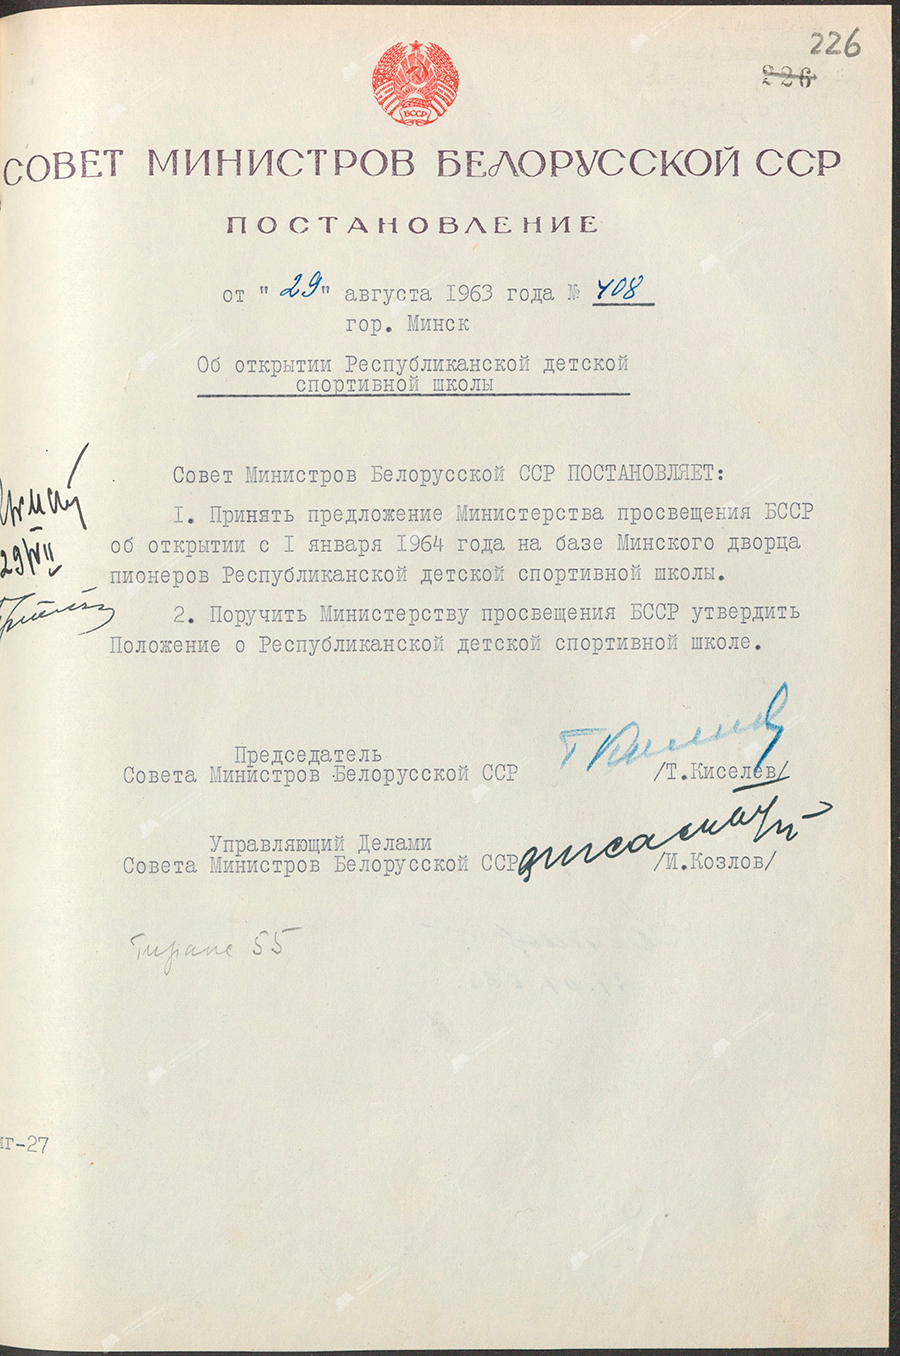 Resolution No. 408 of the Council of Ministers of the BSSR «On the opening of the Republican children's sports school»-стр. 0